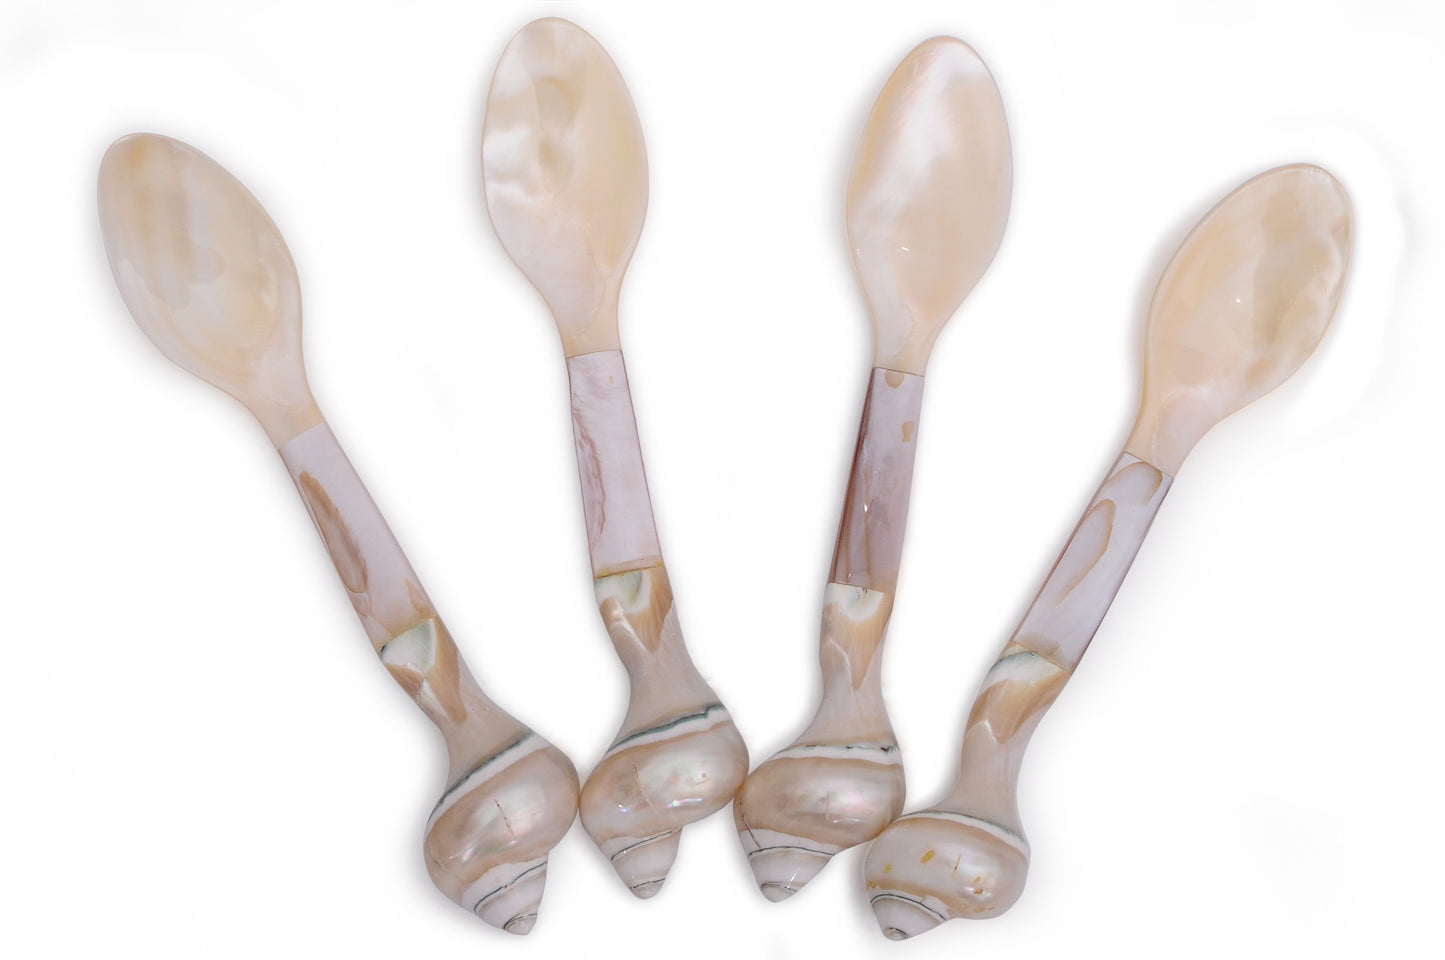 Large Mother of Pearl Shell Spoons Silverware Vietnam Organic Buffalo Horn